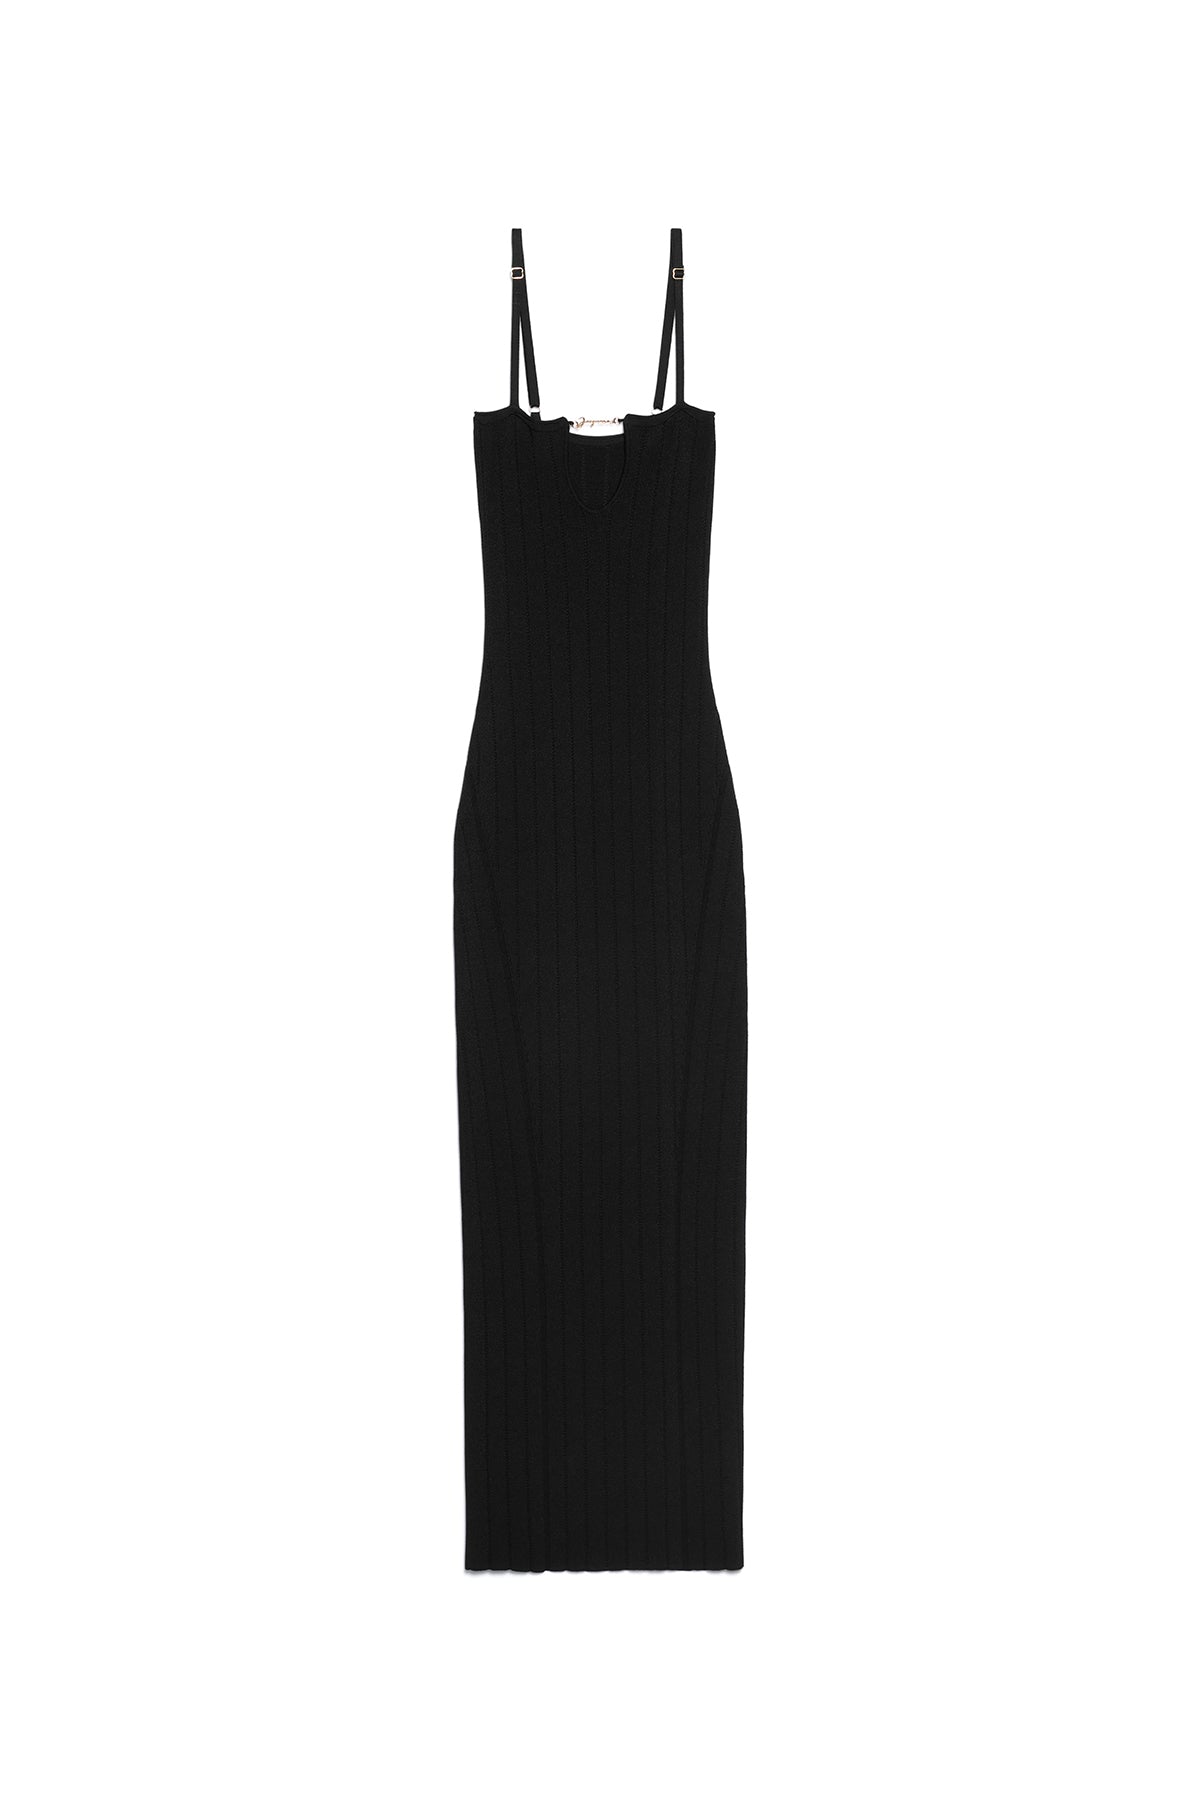 JACQUEMUS | SIERRA DRESS WITH STRAPS